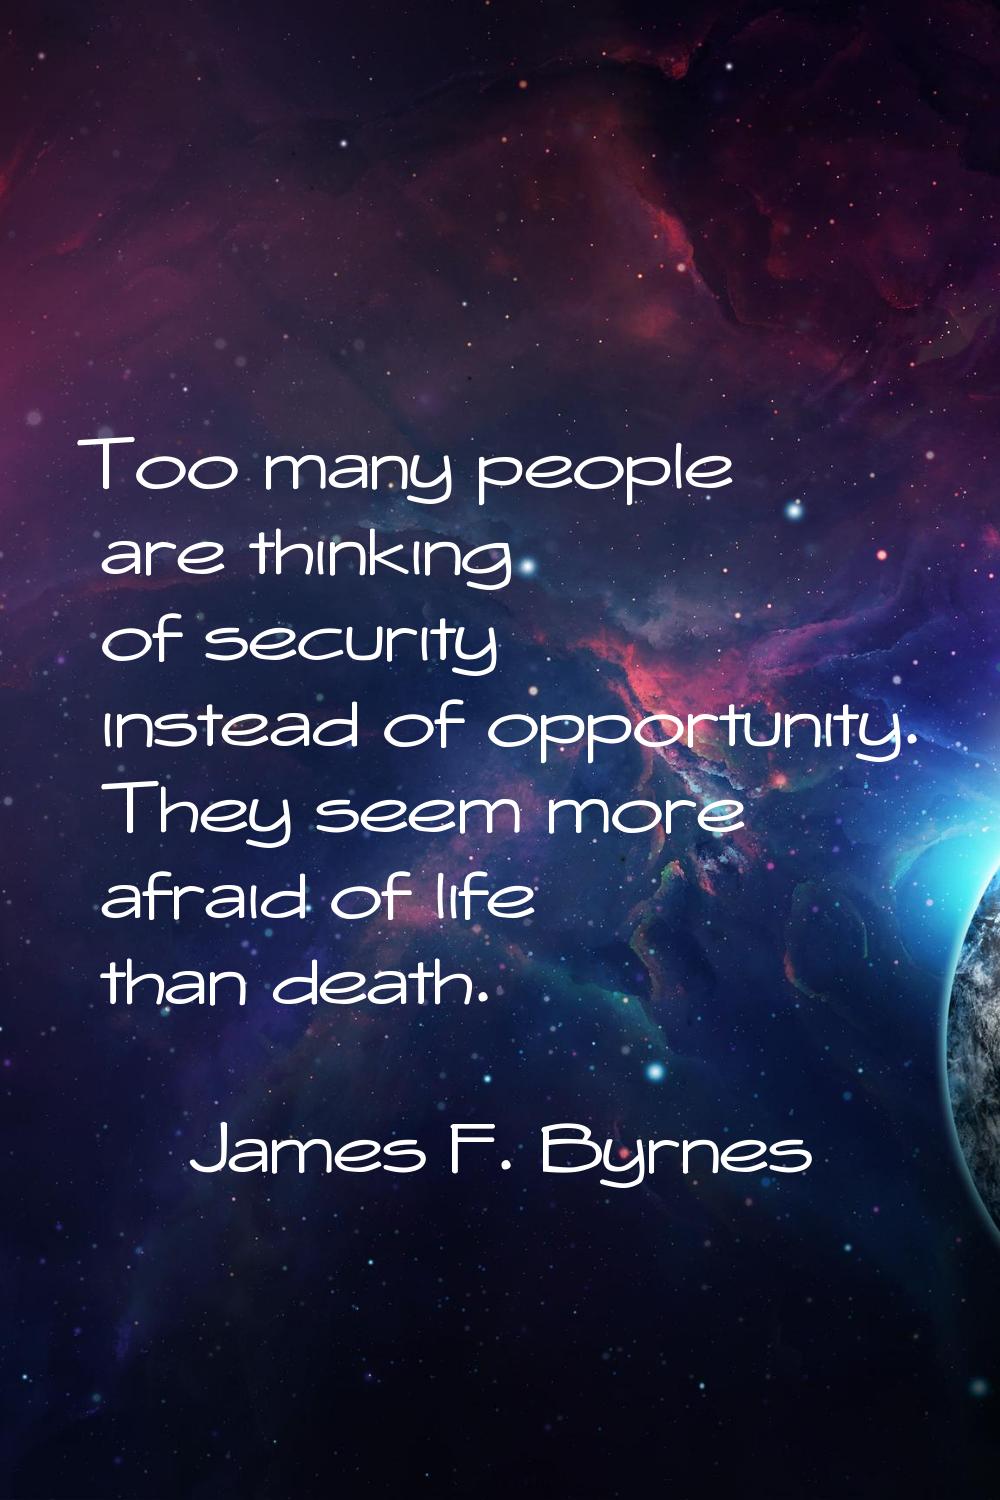 Too many people are thinking of security instead of opportunity. They seem more afraid of life than